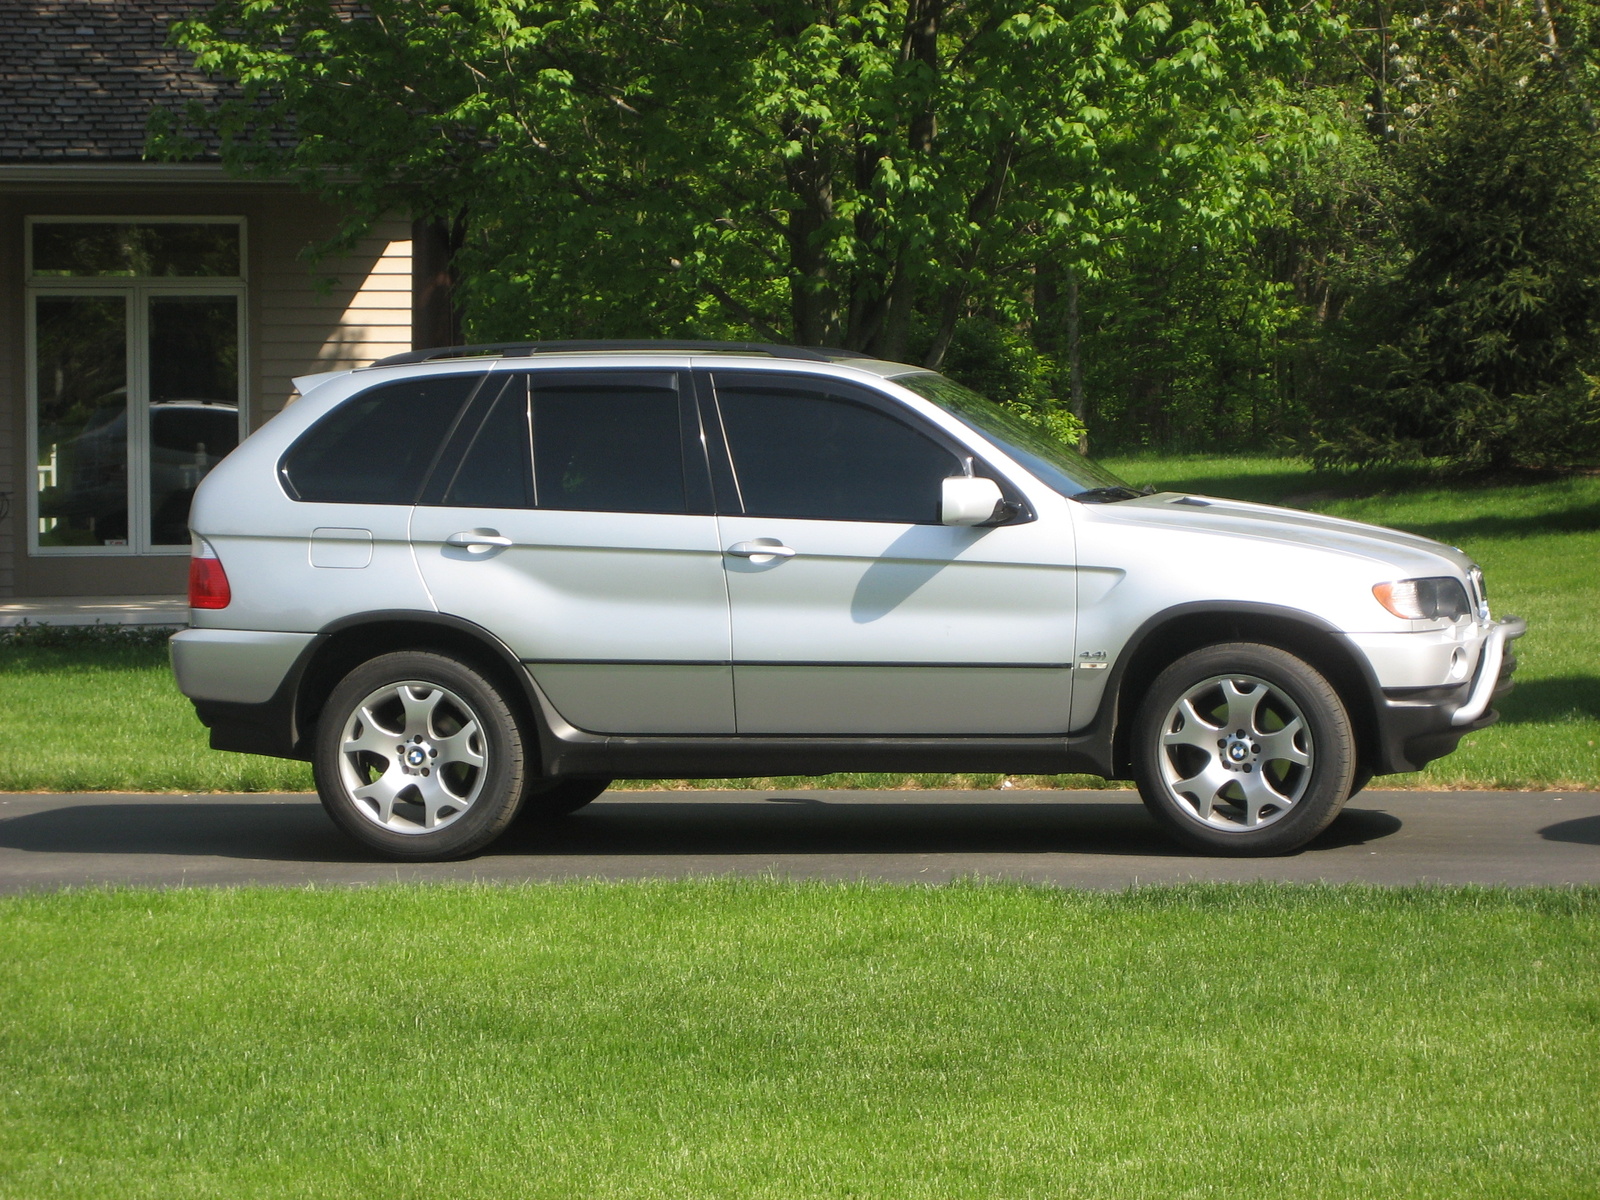 Blue book value of a 2001 bmw x5